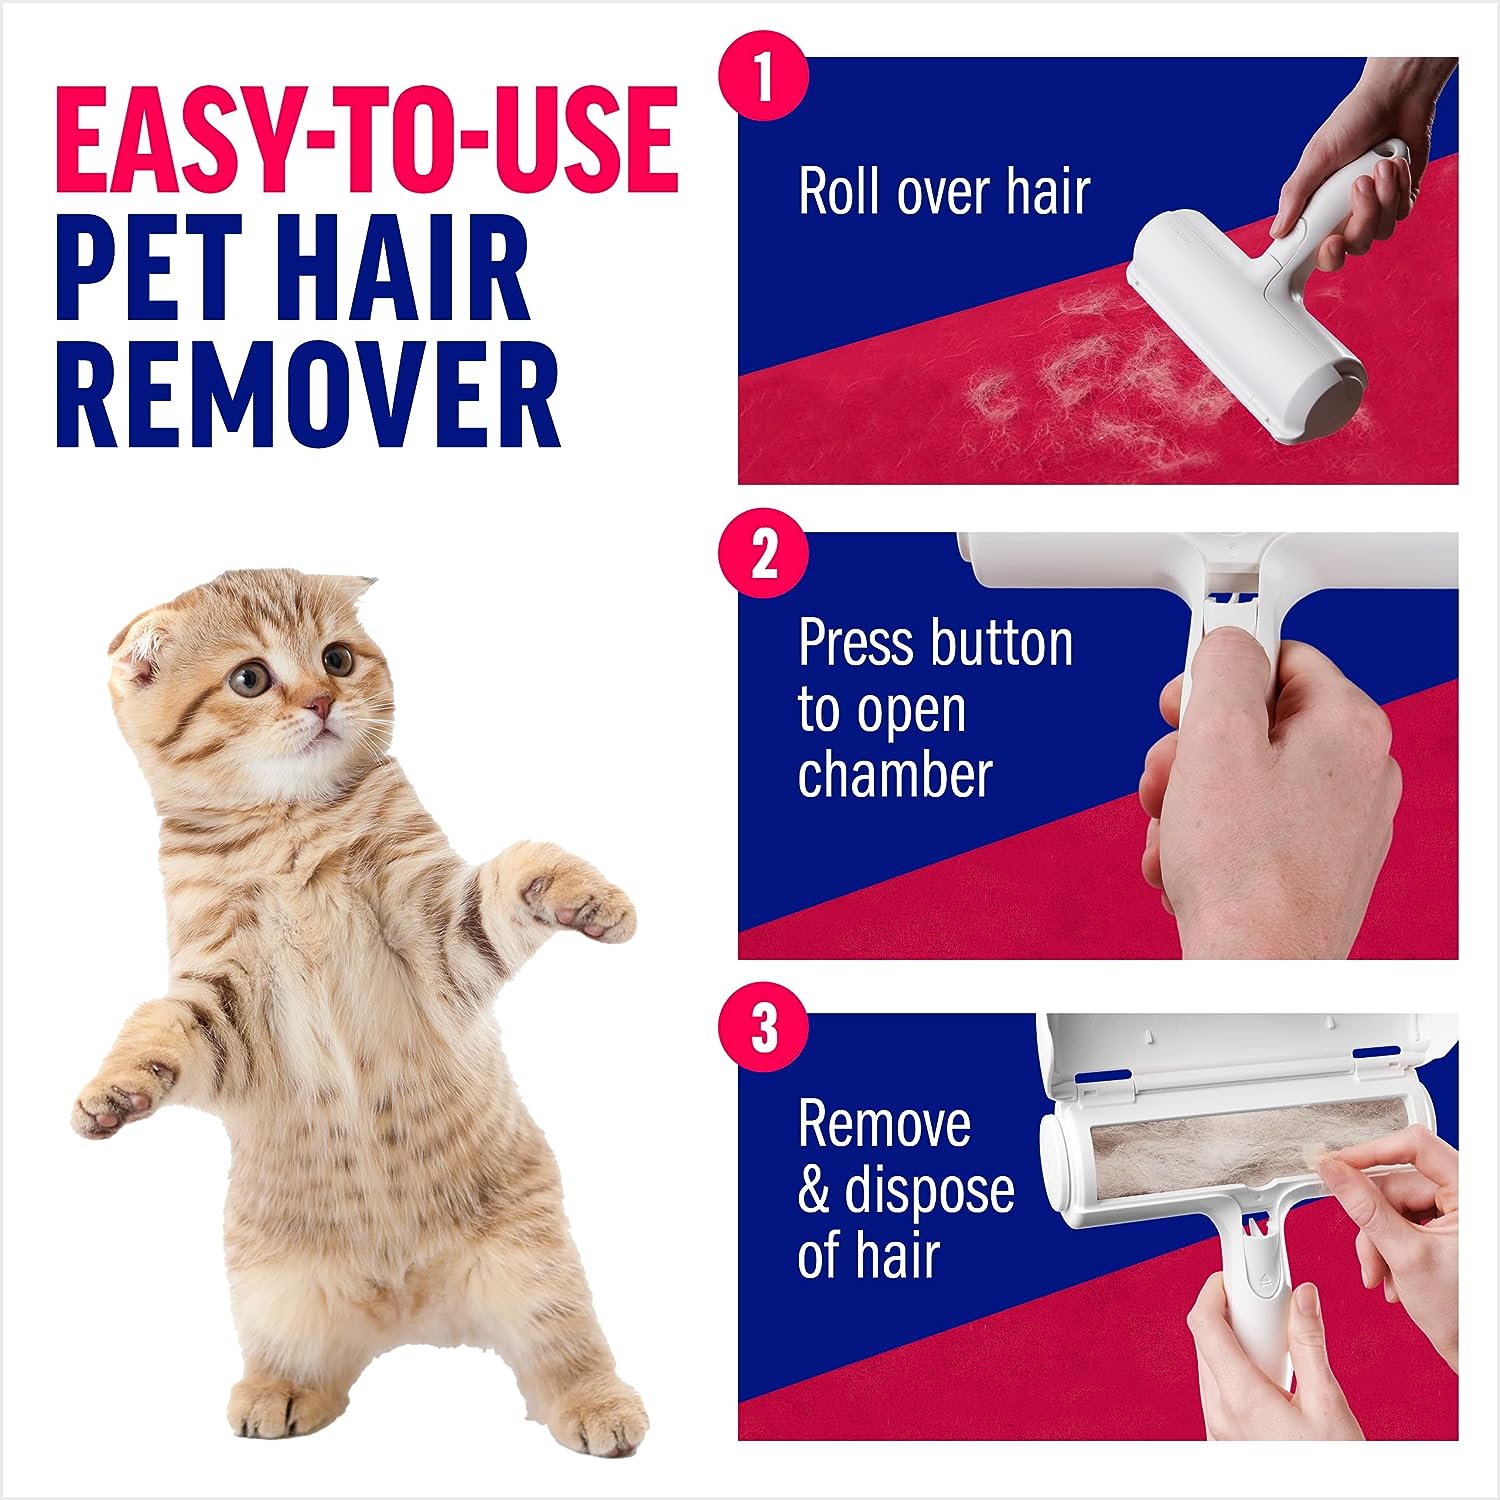 Open Pocket Dog And Cat Fur Remover Best Quality pets-park-pk